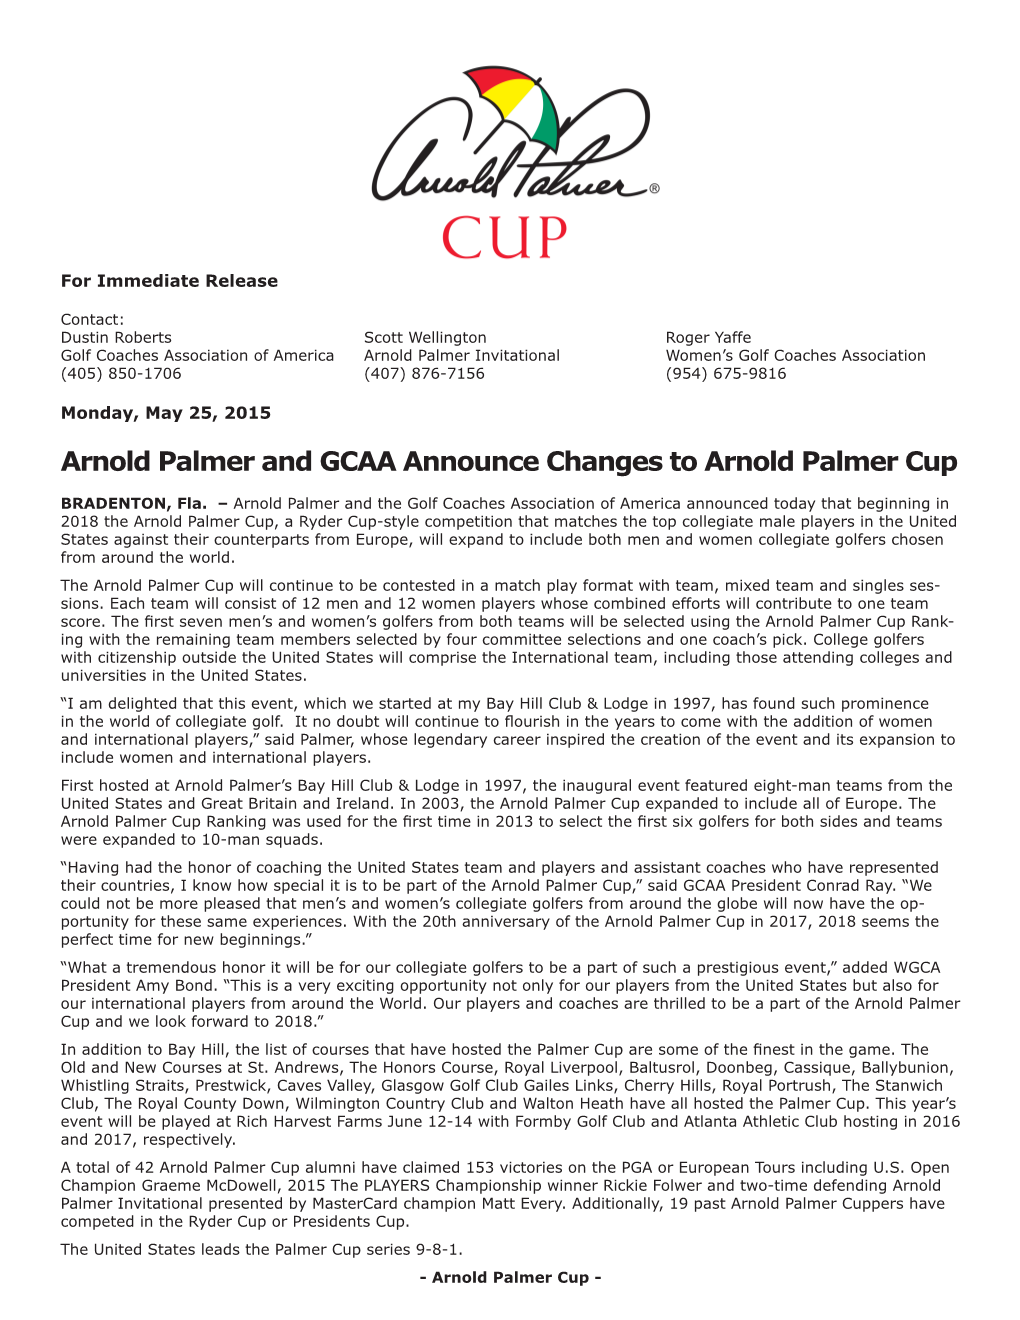 Arnold Palmer and GCAA Announce Changes to Arnold Palmer Cup